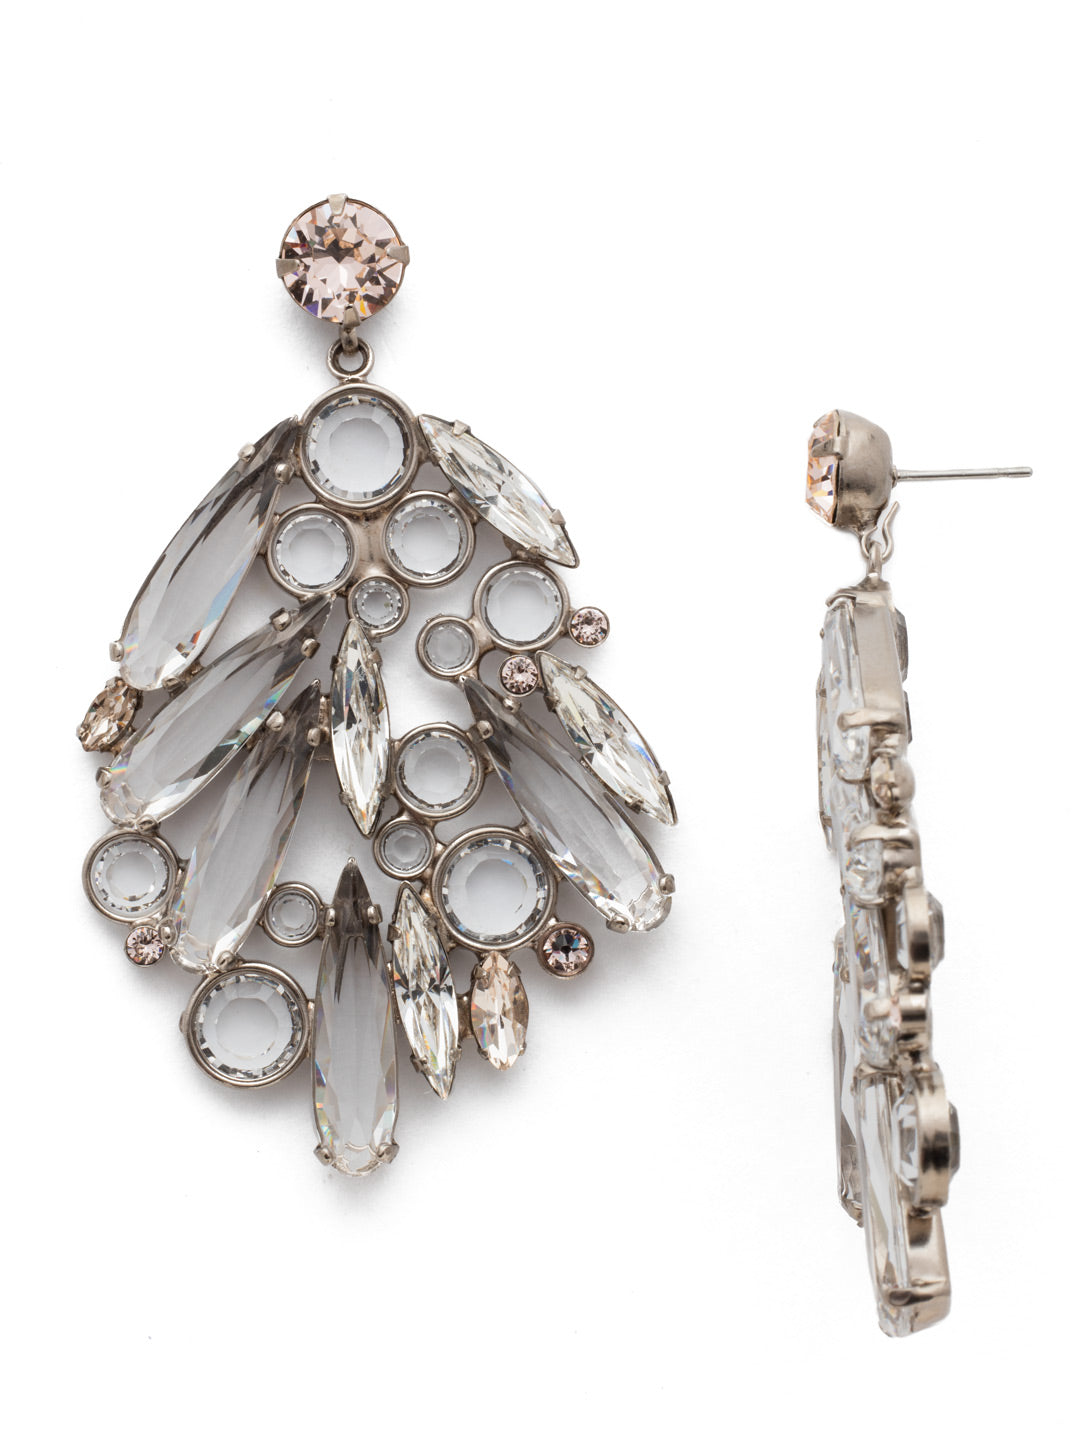 Life of the Party Earring - ECN27ASPLS - <p>You were born to stand out, so compliment your fabulous style with these bold statement earrings. Multi-cut crystals clustered together create a look that will keep all eyes right where they belong - on you! From Sorrelli's Soft Petal collection in our Antique Silver-tone finish.</p>